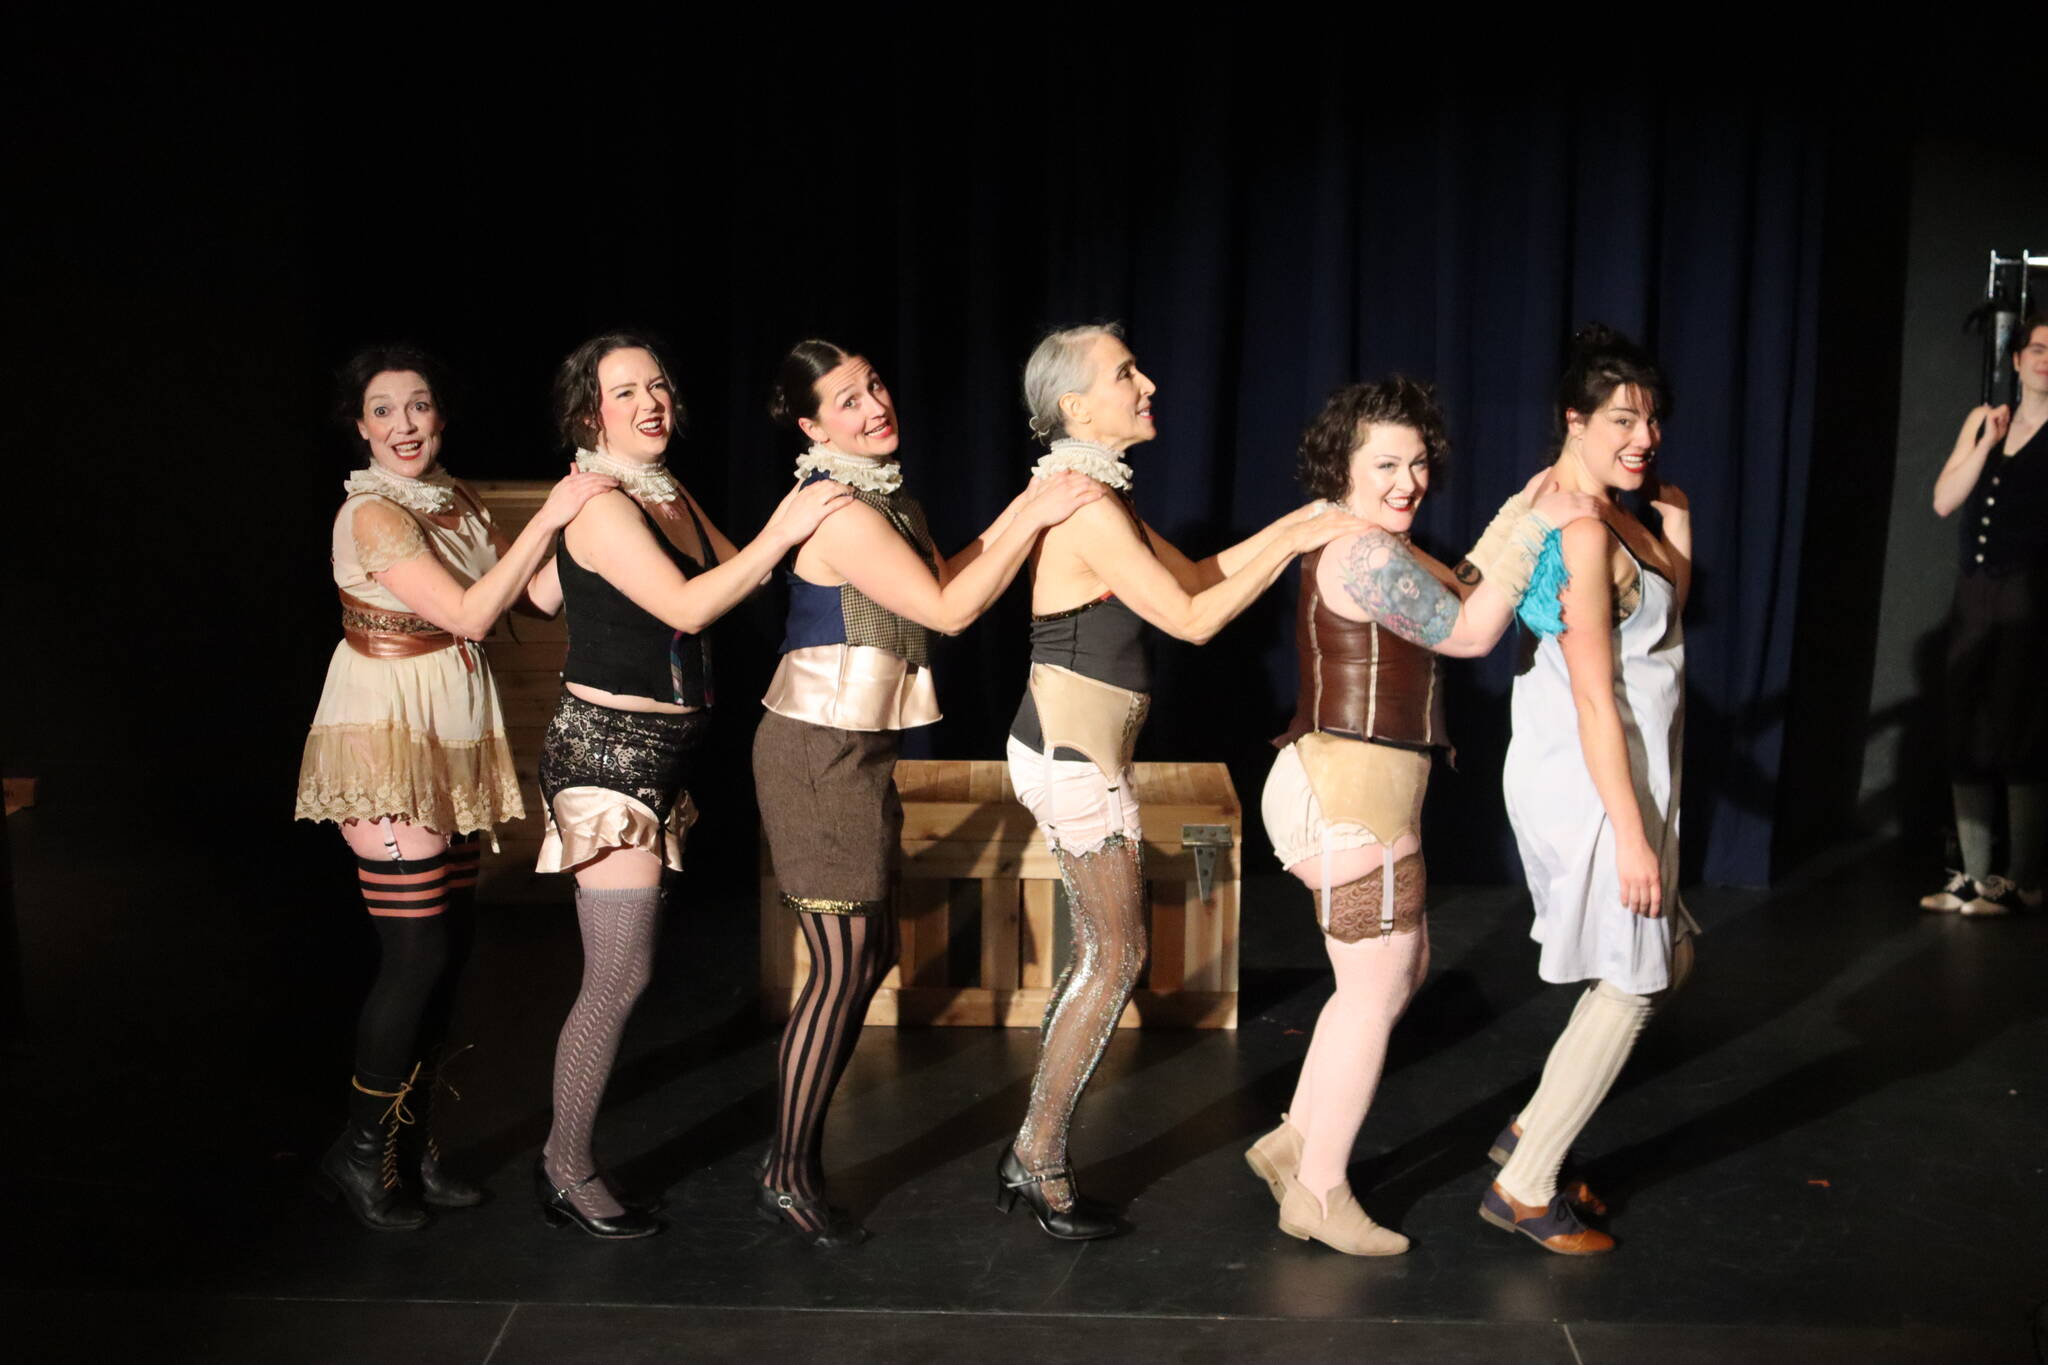 The women of the Kit Kat Club in “Cabaret” take center stage during a rehearsal Monday night at McPhetres Hall for the production by Theatre in the Rough that opens Friday (Meredith Jordan/ Juneau Empire)